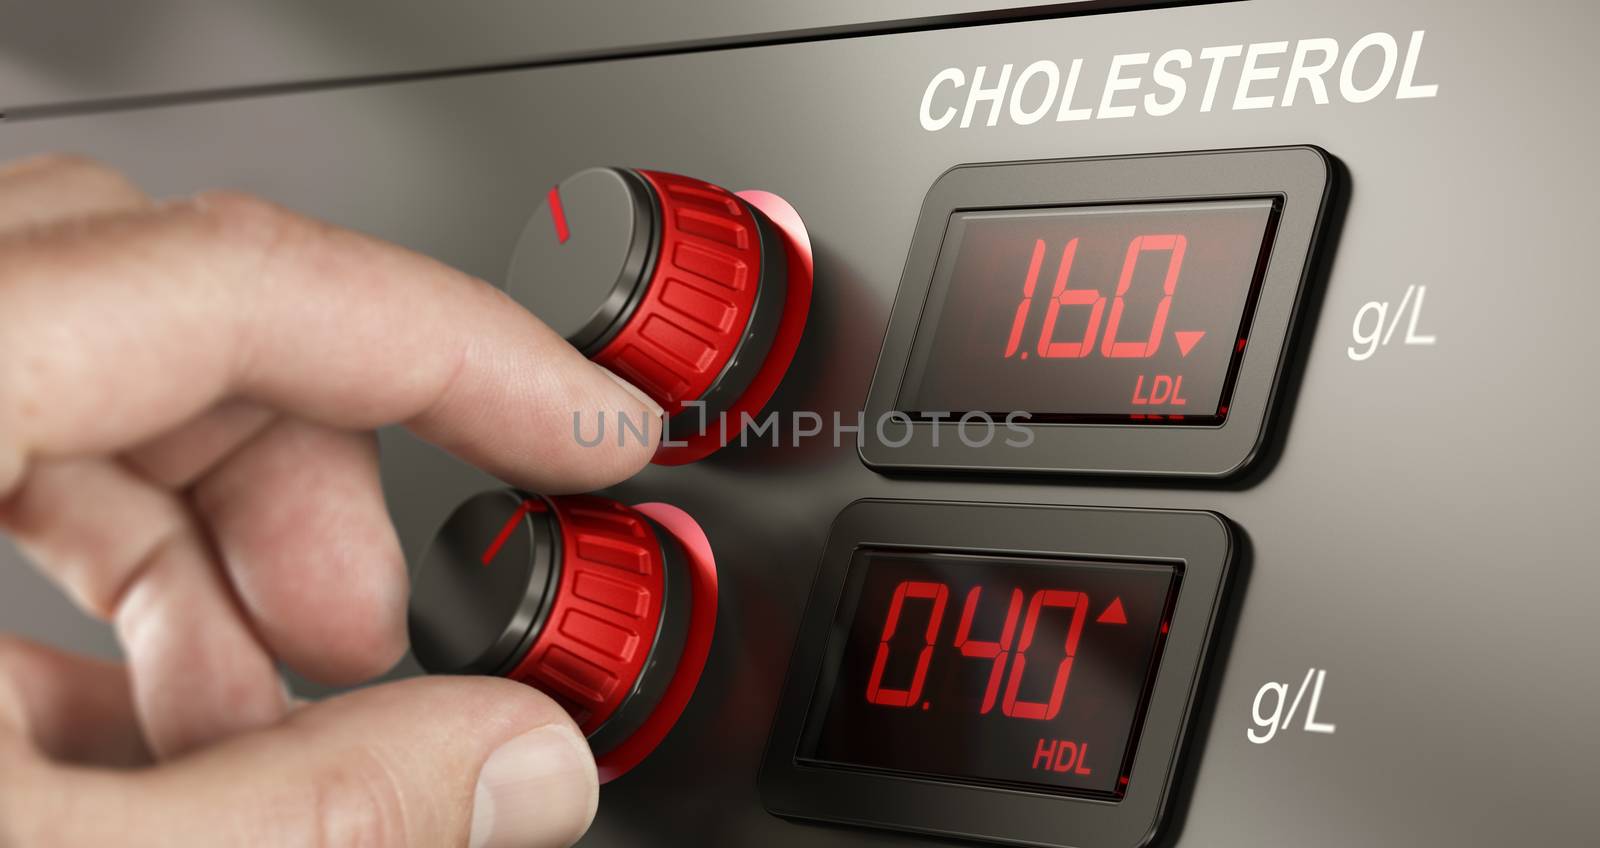 Conceptual dashboard with levels of hdl and ldl cholesterol with fingers turning a button to increase High Density Lipoprotein ratio. Composite image between a hand photography and a 3D background.